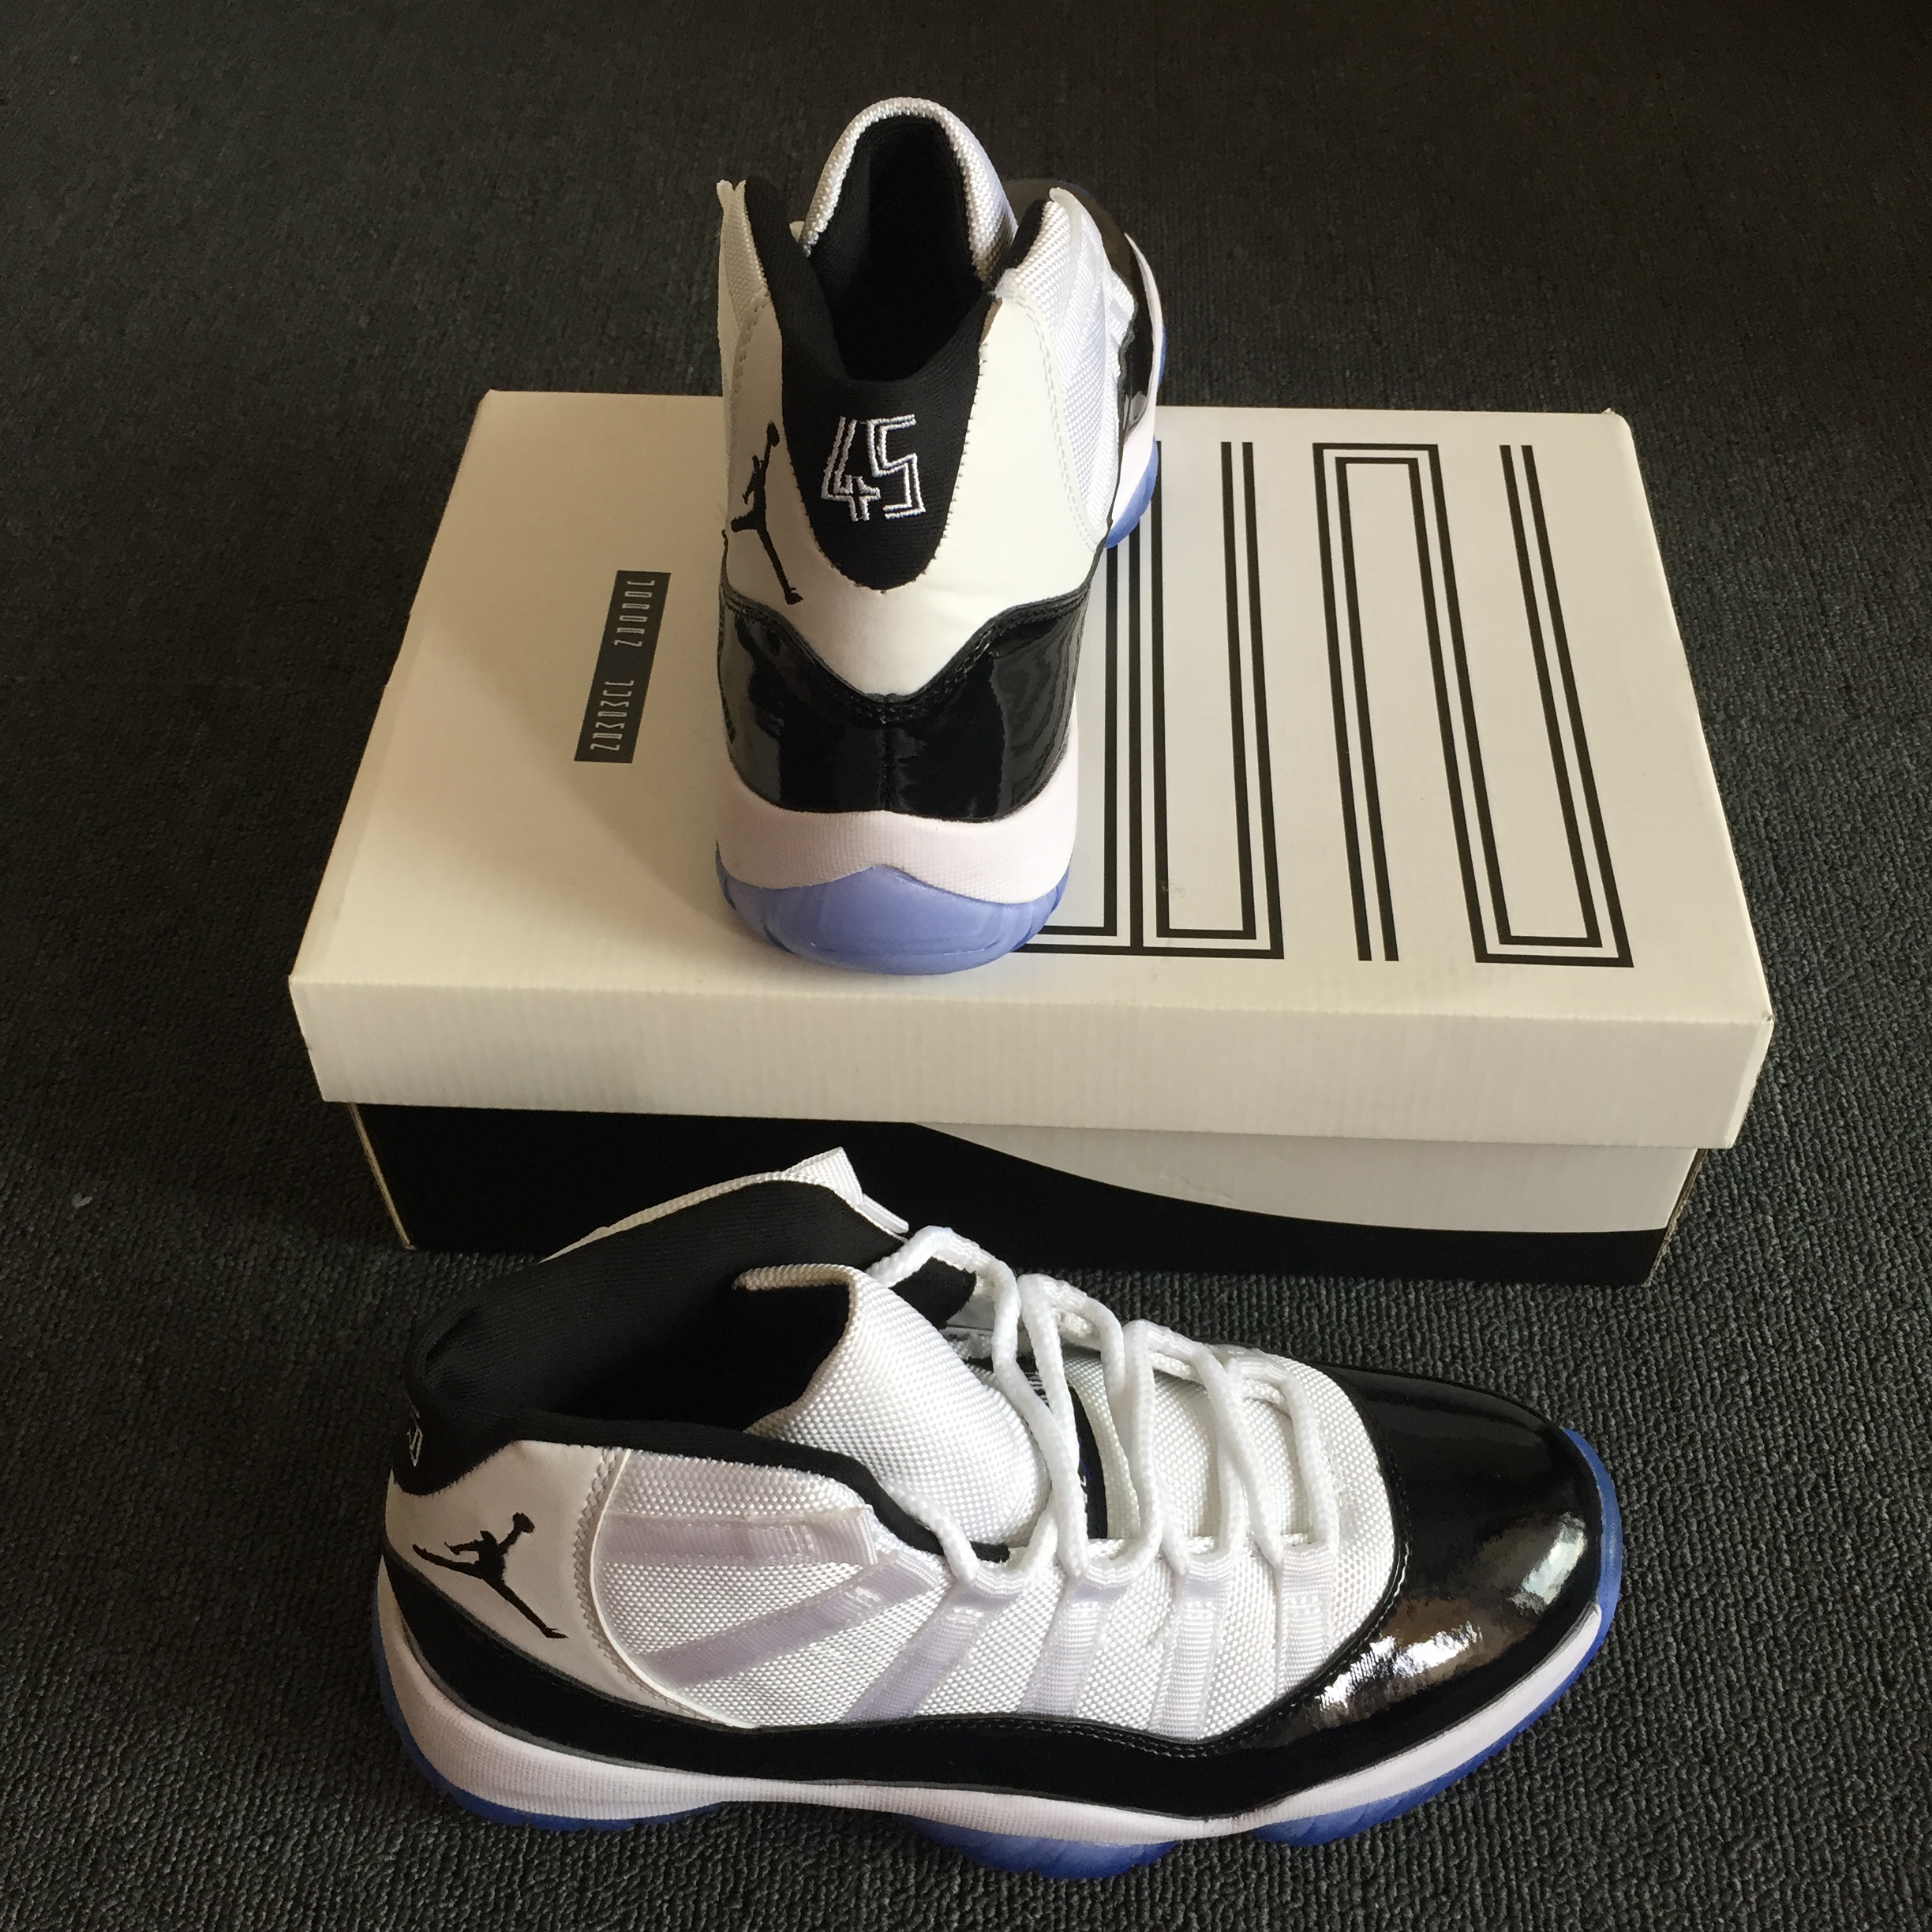 Air Jordan 11 Concord with Number 45 - Click Image to Close